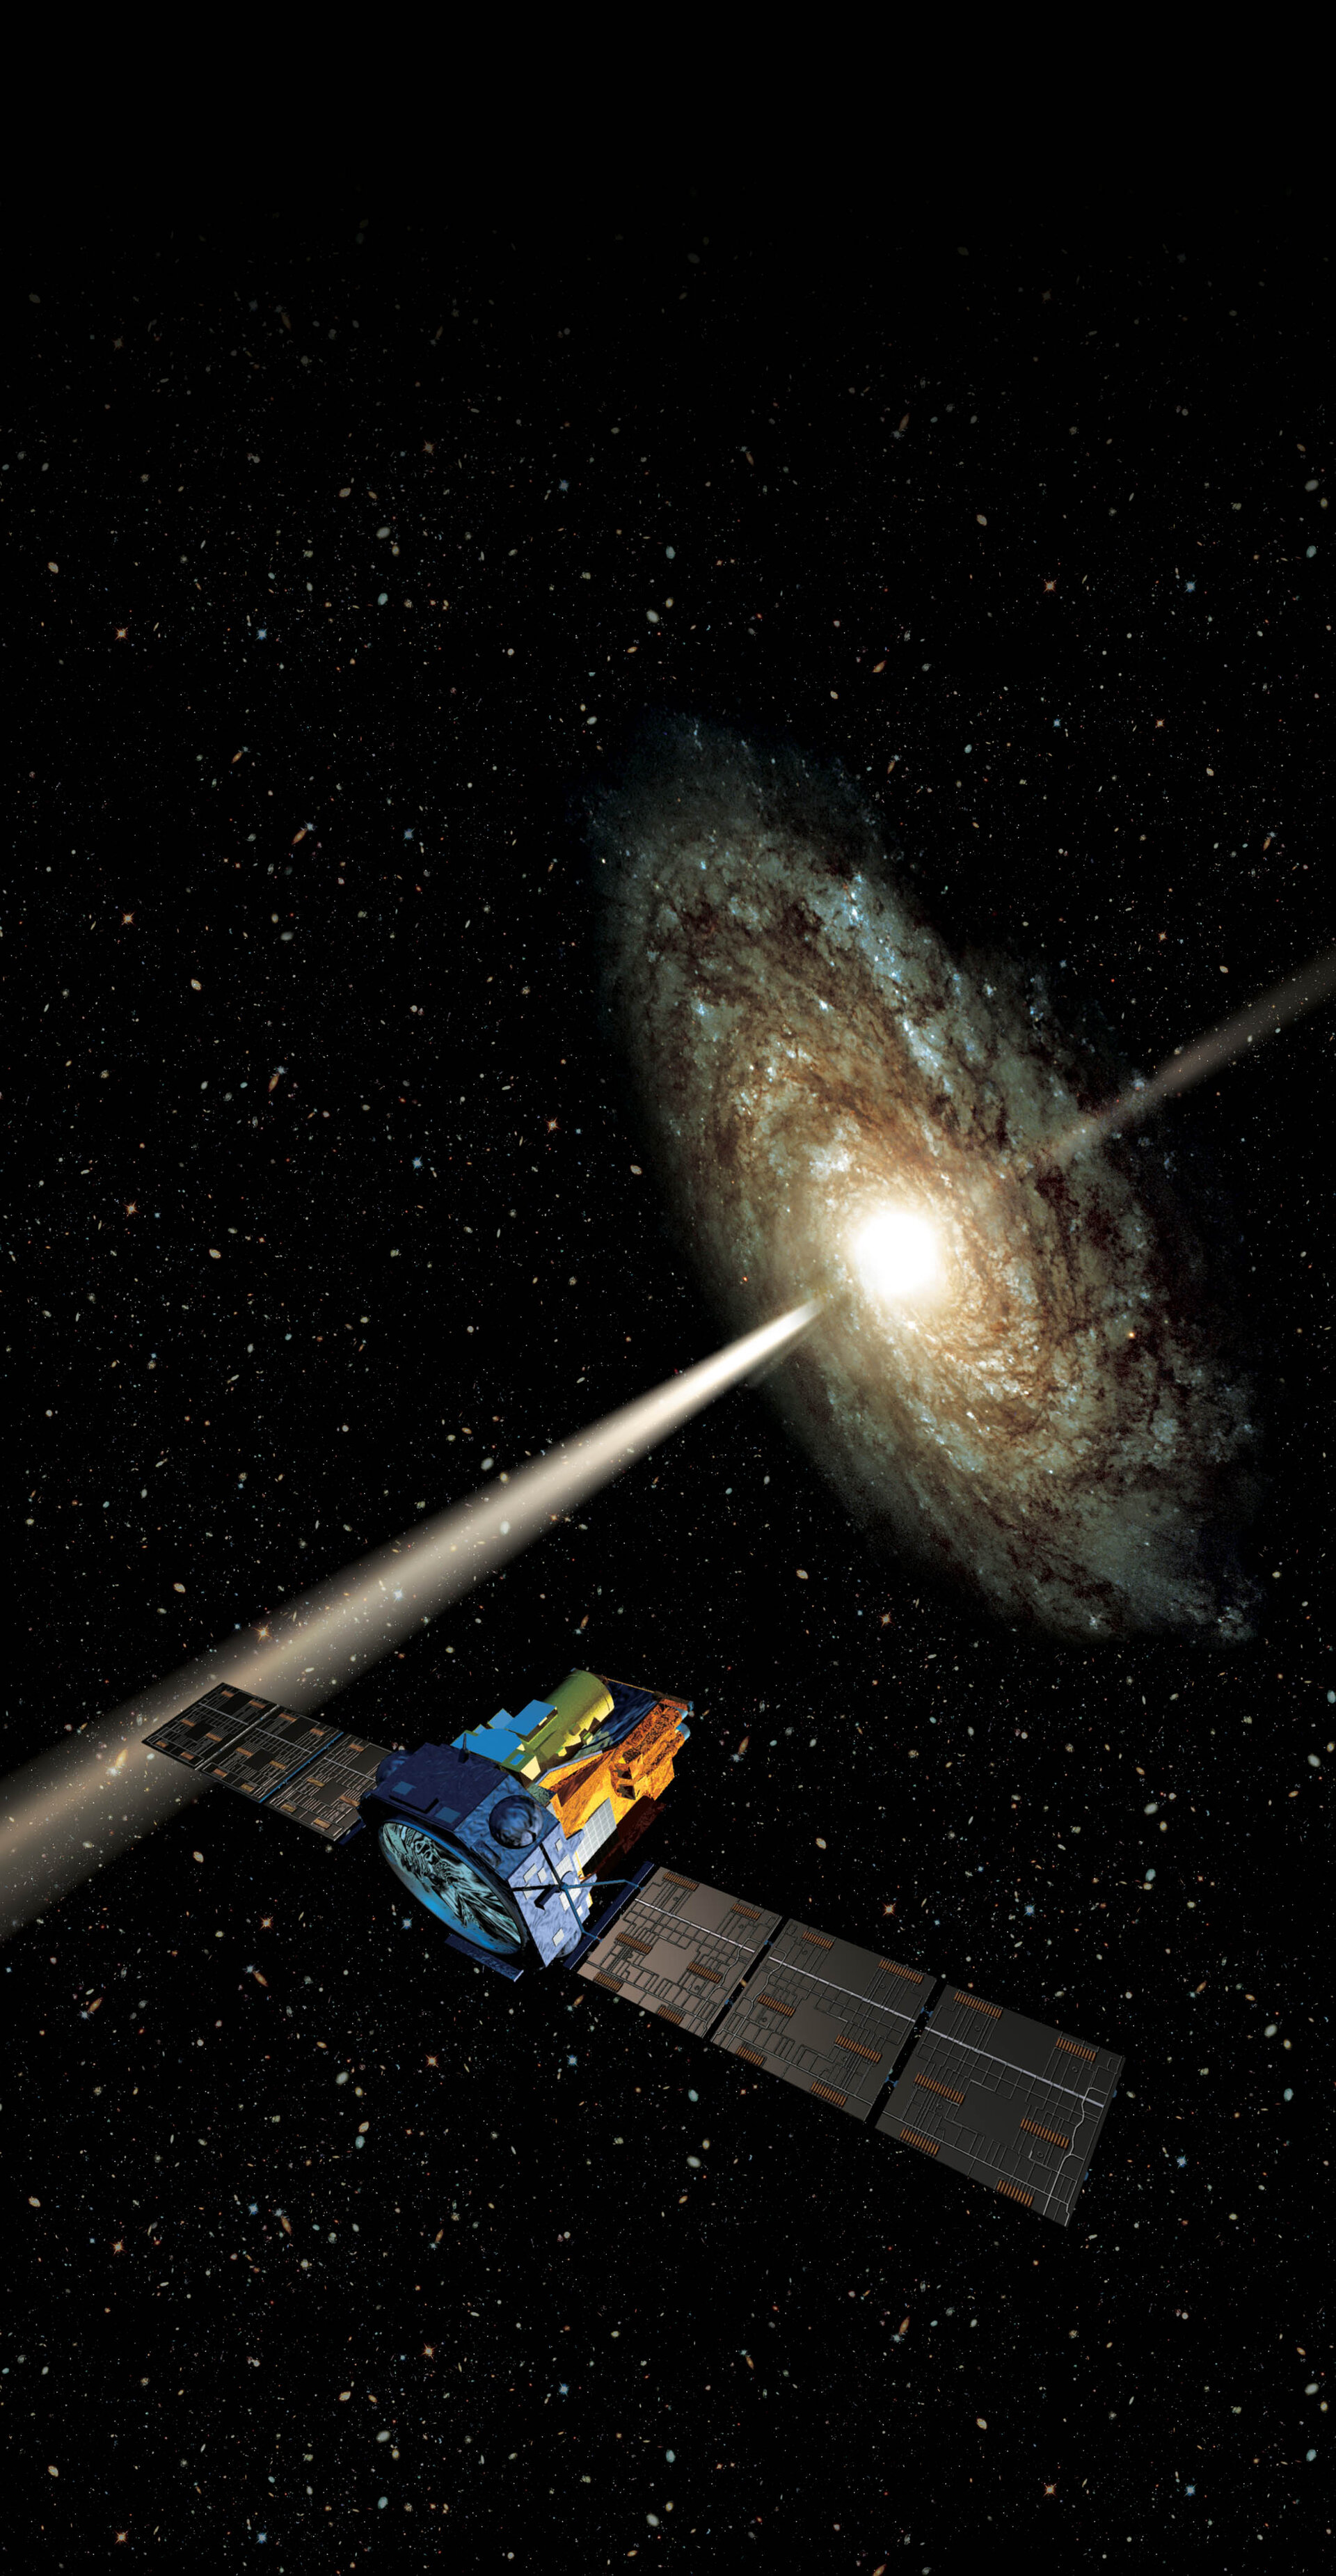 An artist's impression of the Integral spacecraft